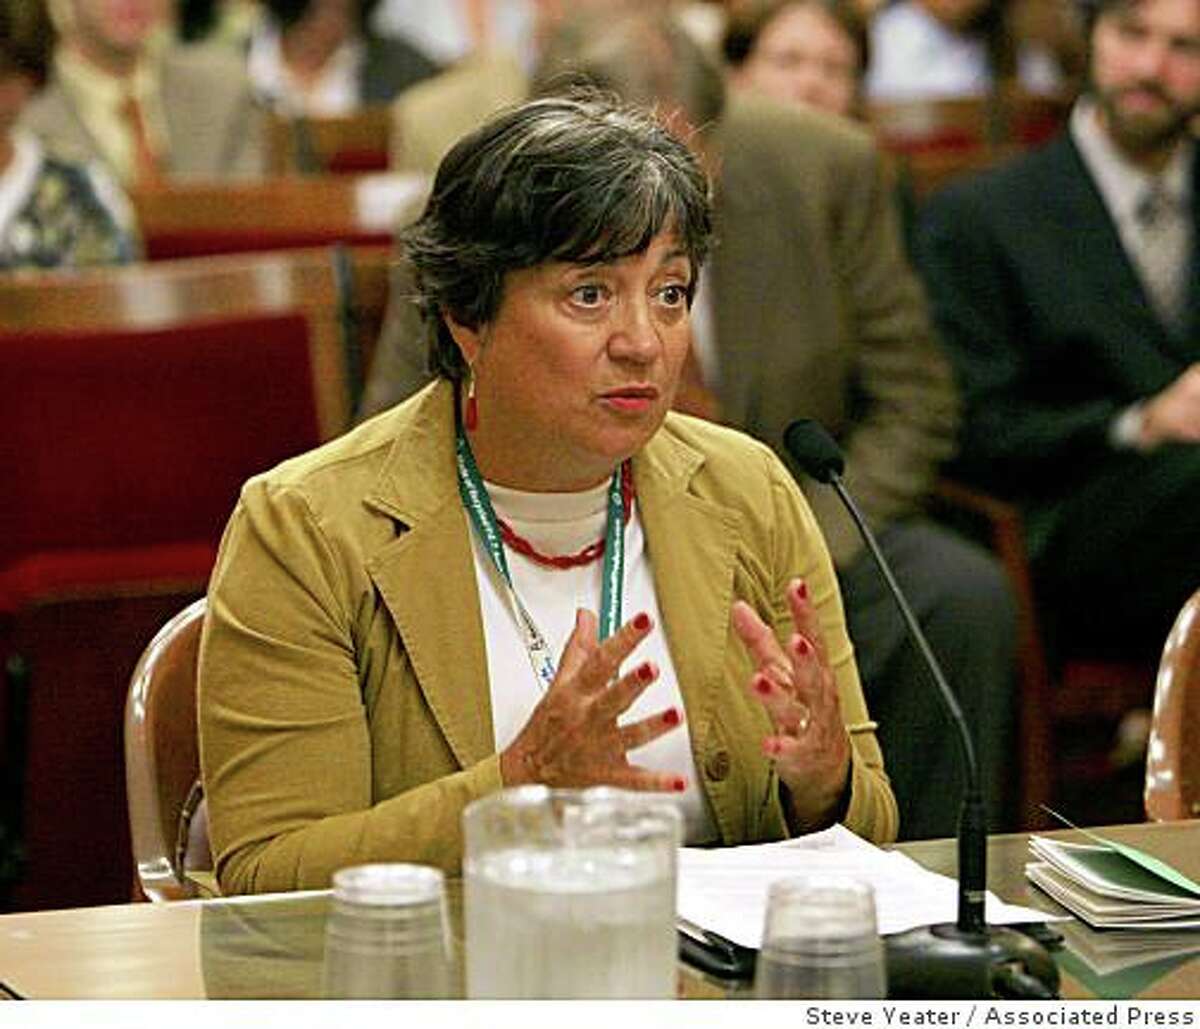 Mary Nichols, speaks before the Senate Rules Committee at the Capitol in Sacramento, Calif., Tuesday, July 17, 2007. The Senate Rules Committee was holding the hearing to consider Gov. Schwarzenegger's appointment of Nichols.